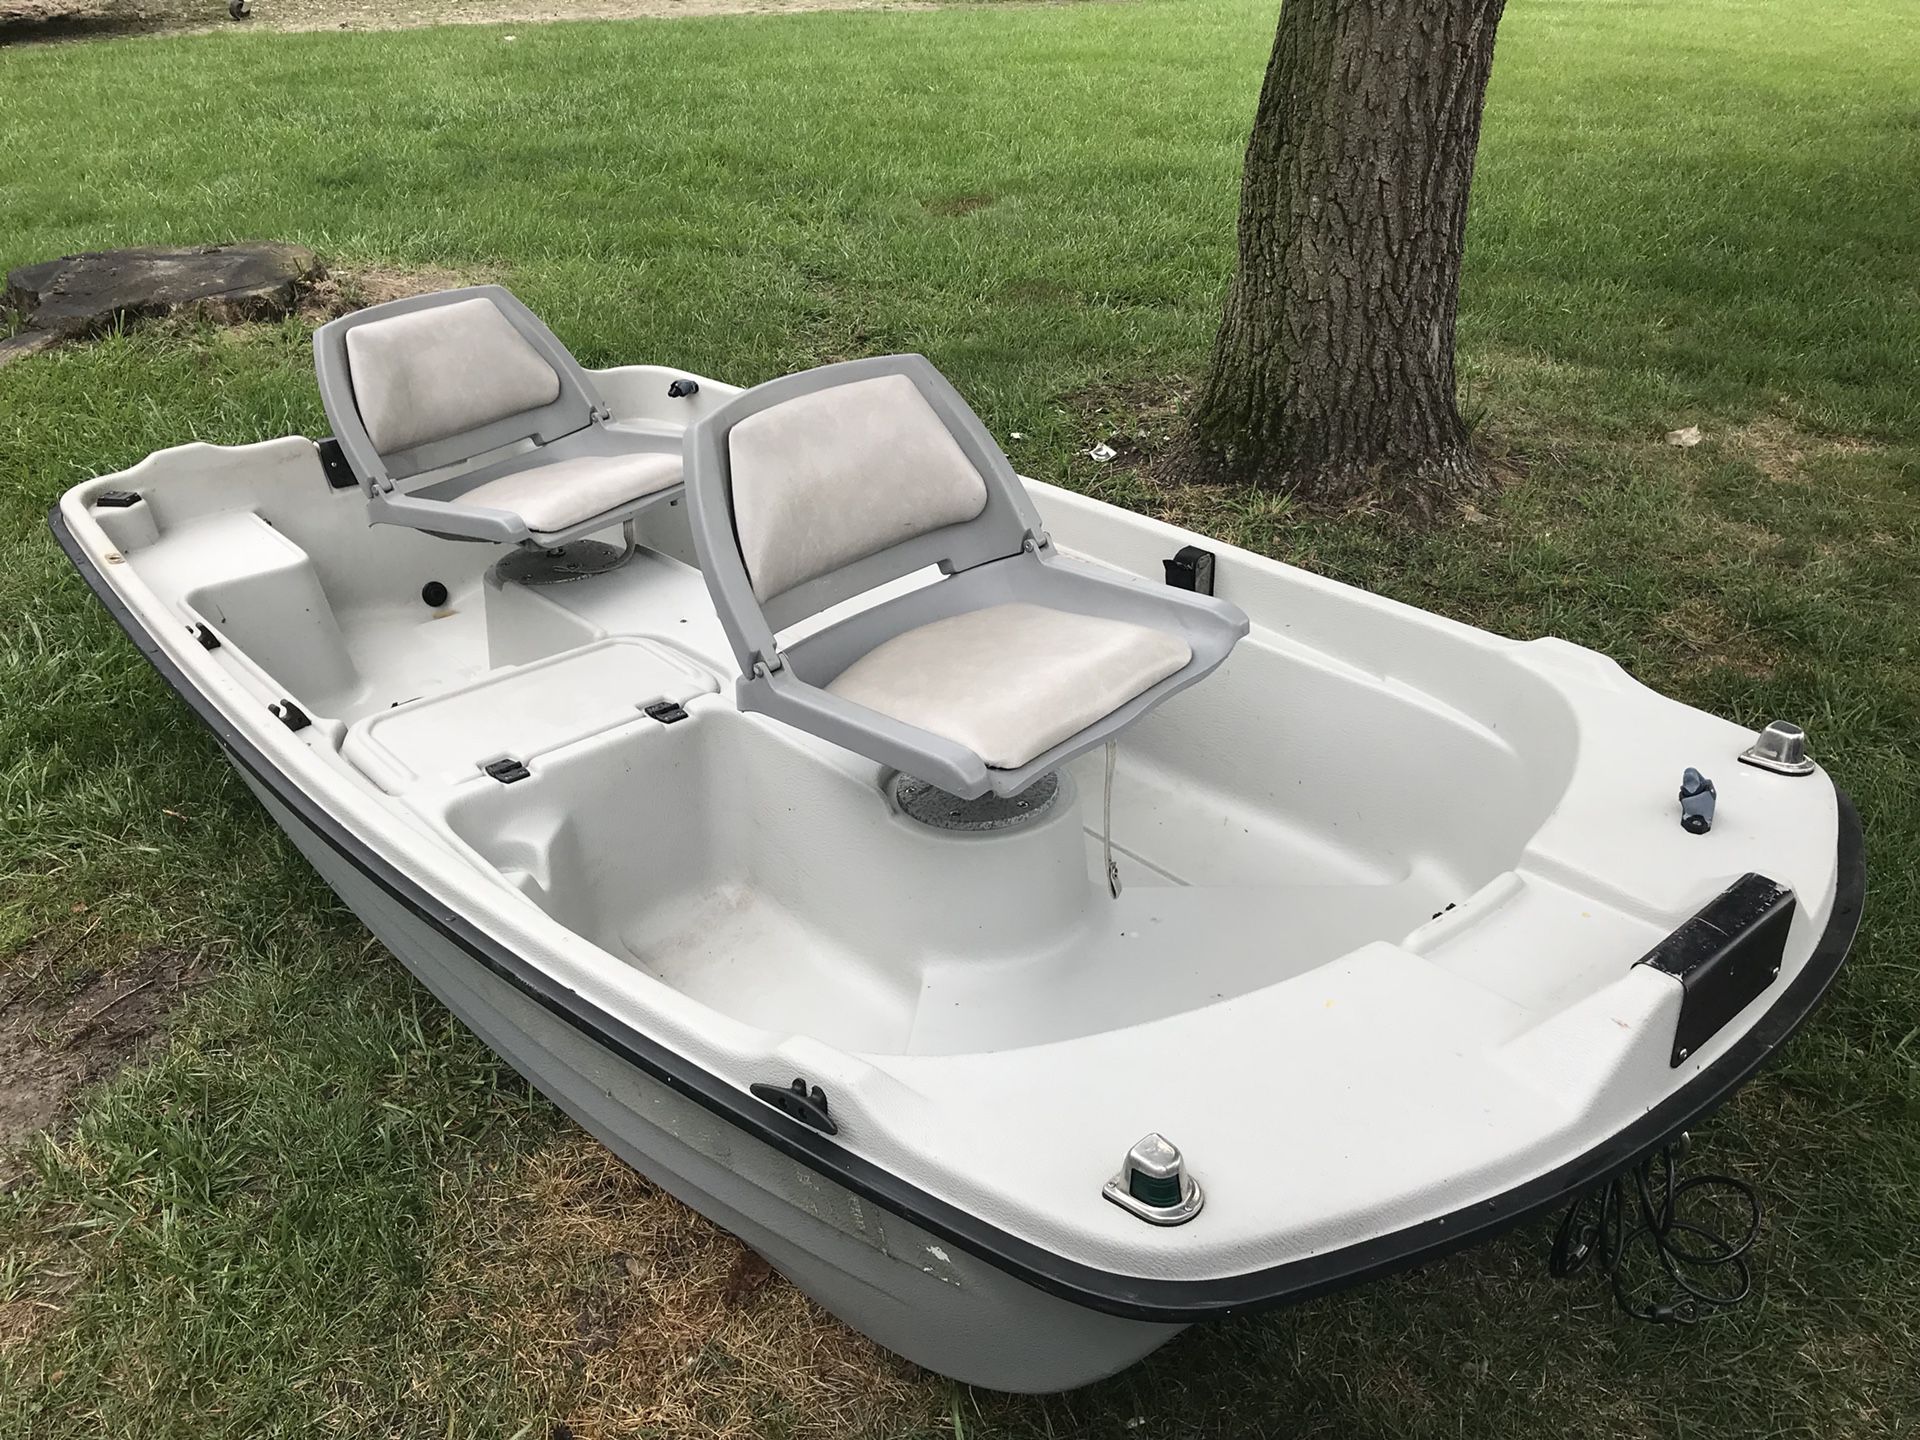 9ft Bass Hound Boat for Sale in Chicago Heights, IL - OfferUp